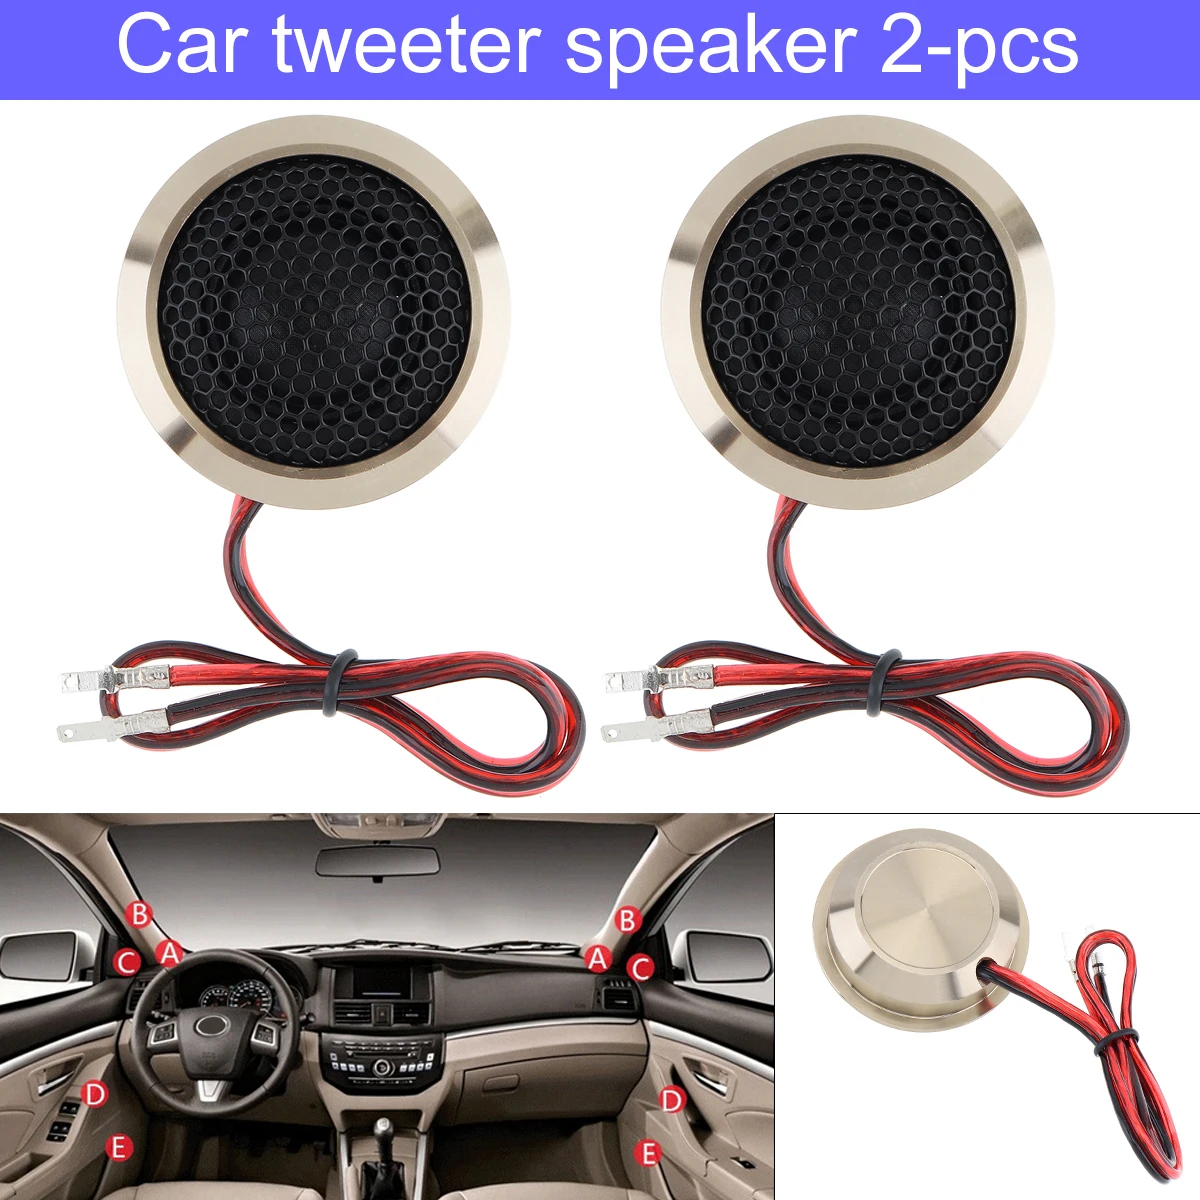 2pcs 1.5 Inch Q25 Aluminum Alloy High Efficiency Mini Dome Tweeter Speakers for Car Audio System